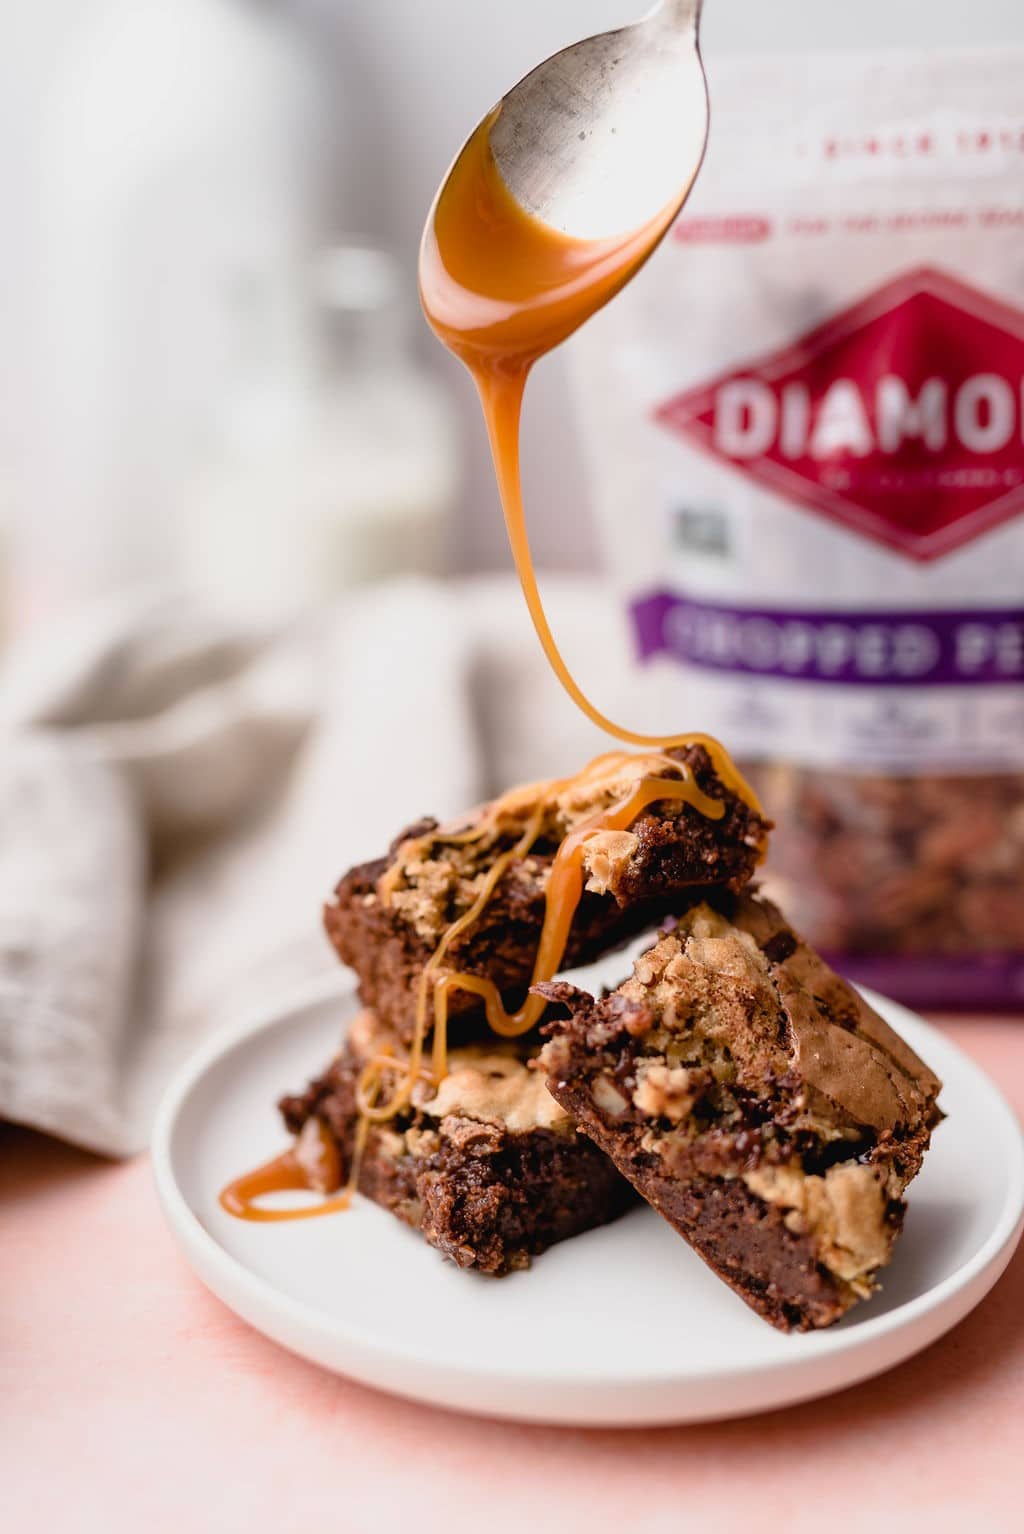 Spoon drizzling caramel on plate of Salted Caramel Pecan Brookies in front of bag of Diamond nuts.